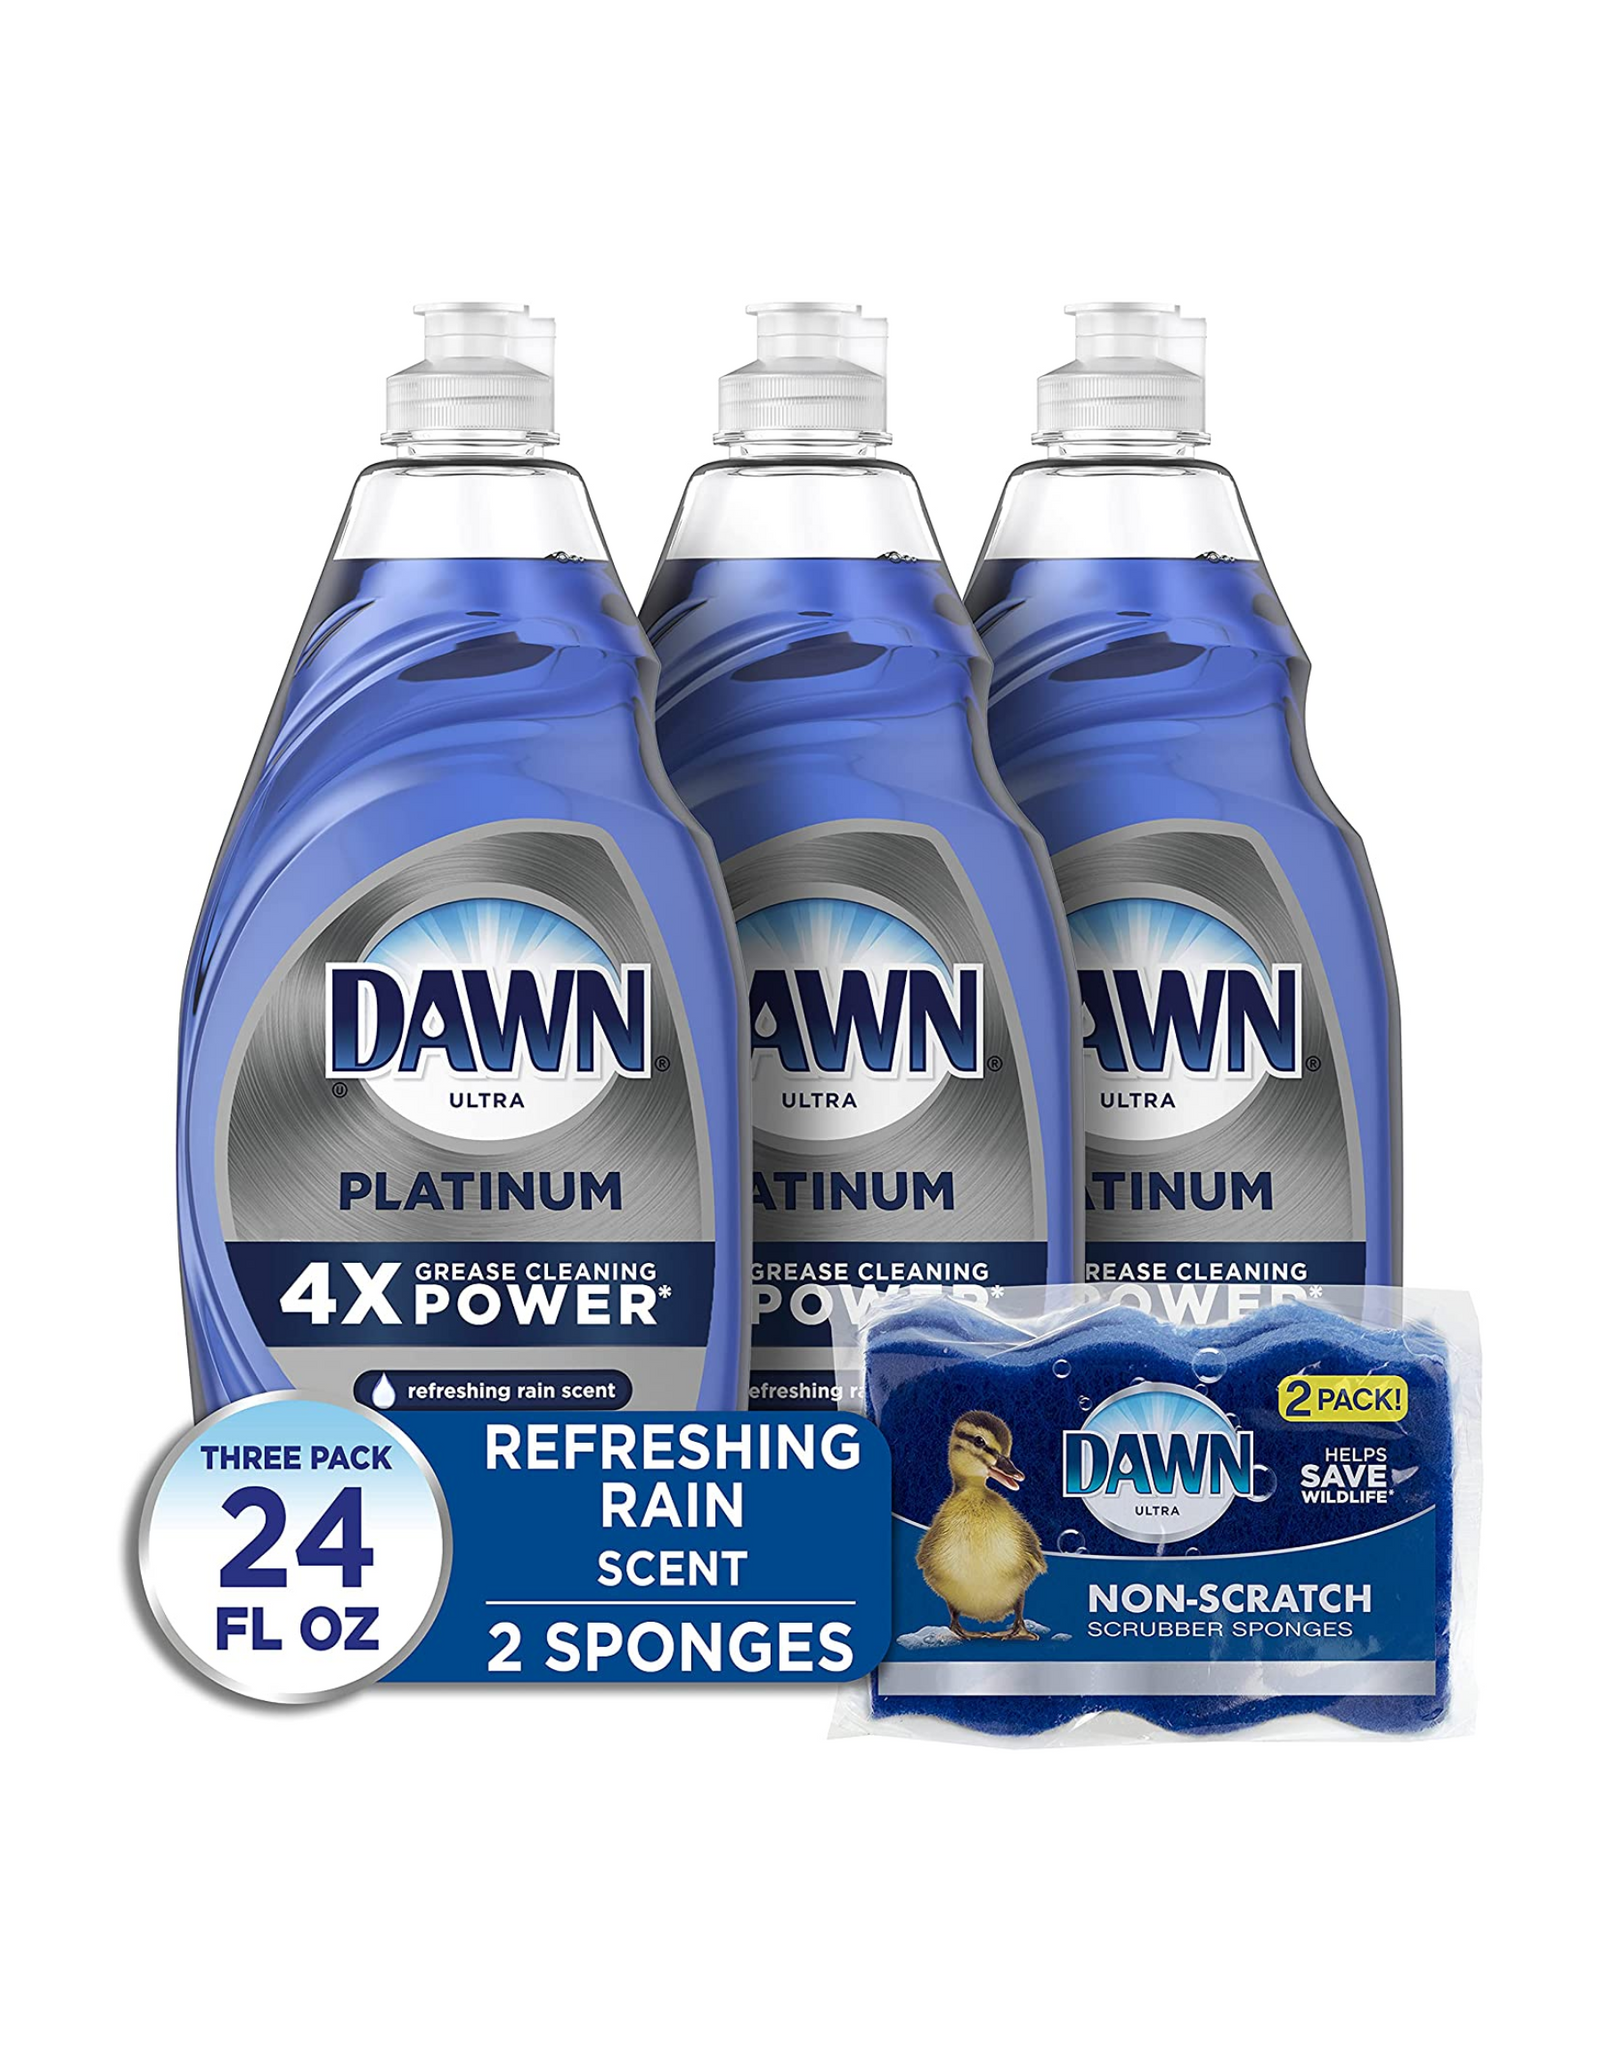 Dawn Dish Soap Platinum Dishwashing Liquid + Two Non-Scratch Scrubber Sponges, 24 fl oz each (Pack of 3) Packaging May Vary